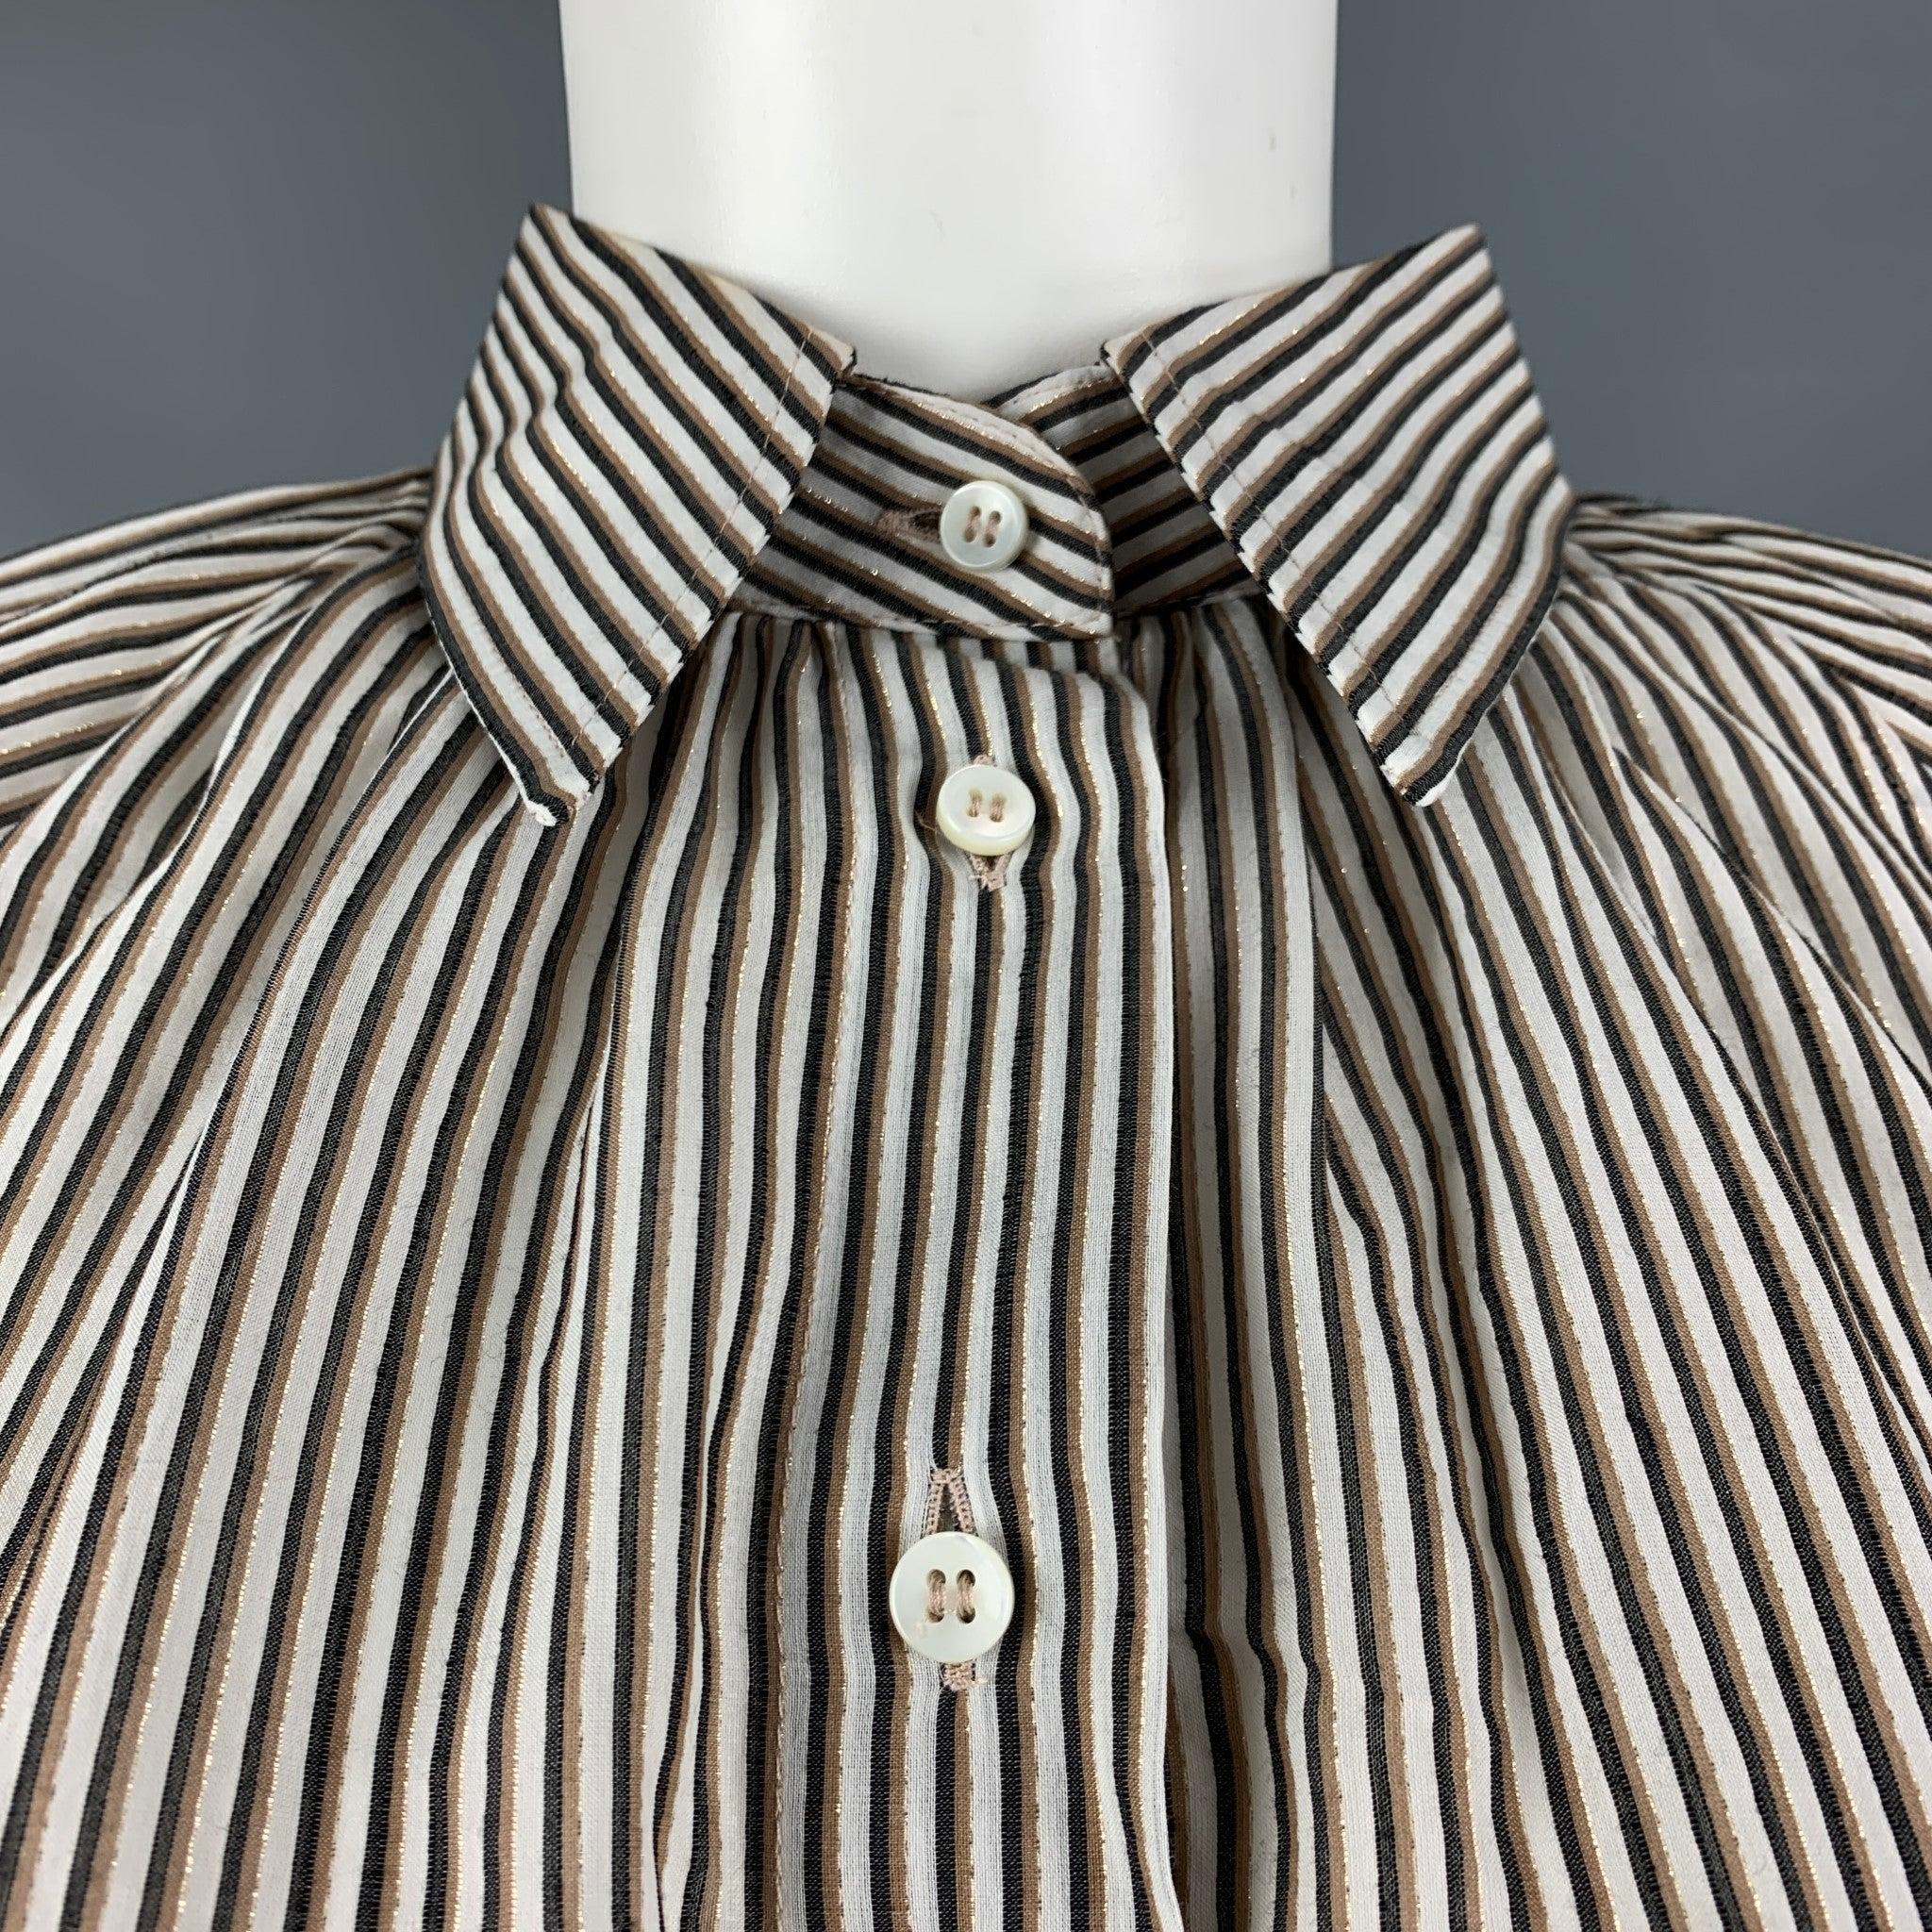 BRUNELLO CUCINELLI 3/4
 sleeves shirt comes in a white, brown and black striped cotton blend woven material featuring a puff sleeve, and button down closure. Made in Italy.Excellent Pre-Owned Condition. 

Marked:   L 

Measurements: 
 
Shoulder: 16